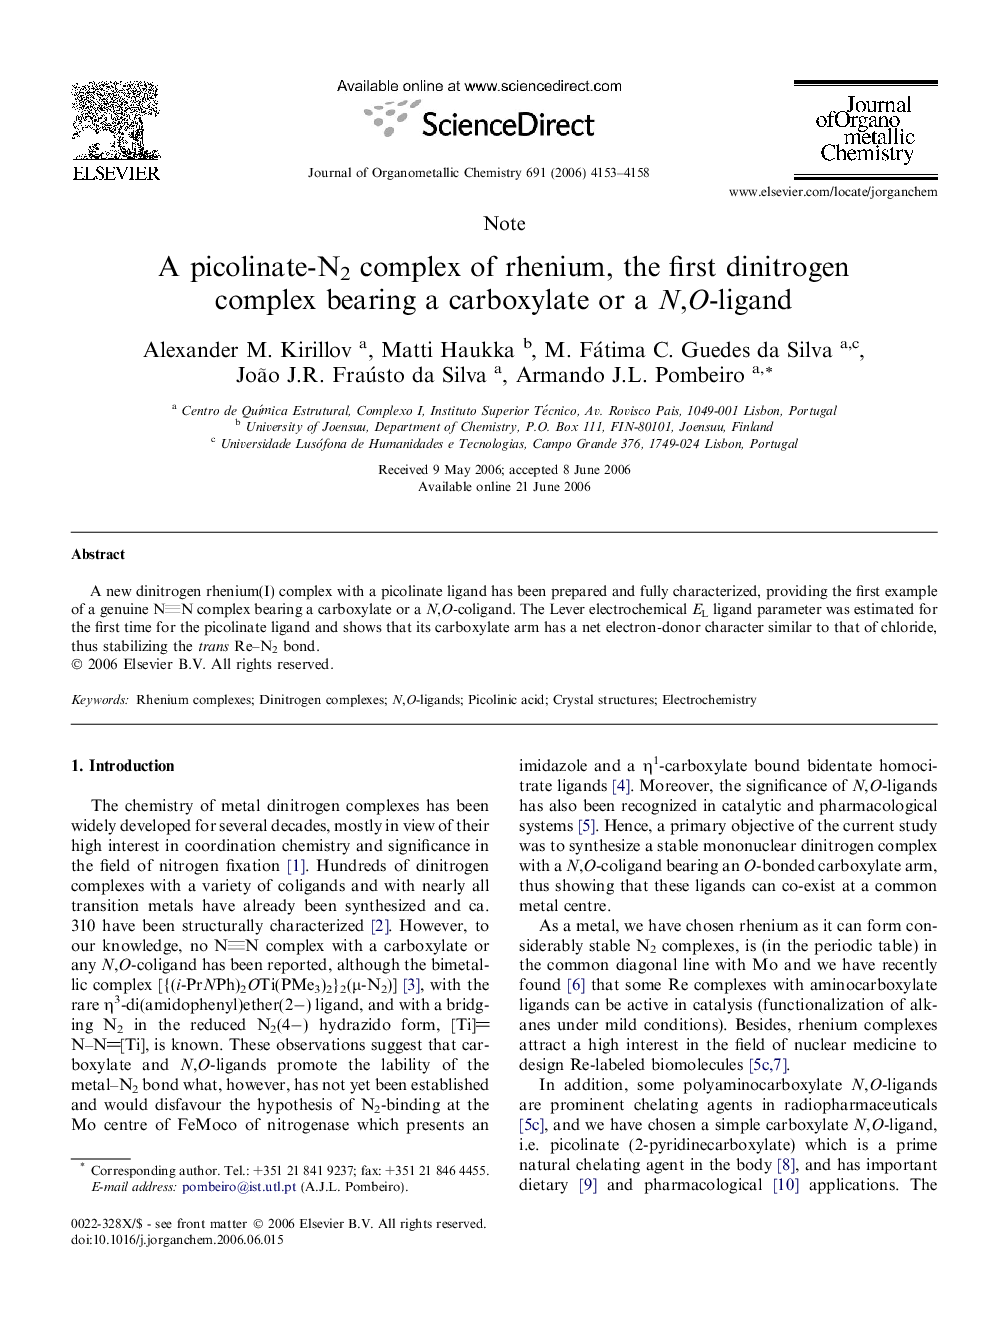 A picolinate-N2 complex of rhenium, the first dinitrogen complex bearing a carboxylate or a N,O-ligand